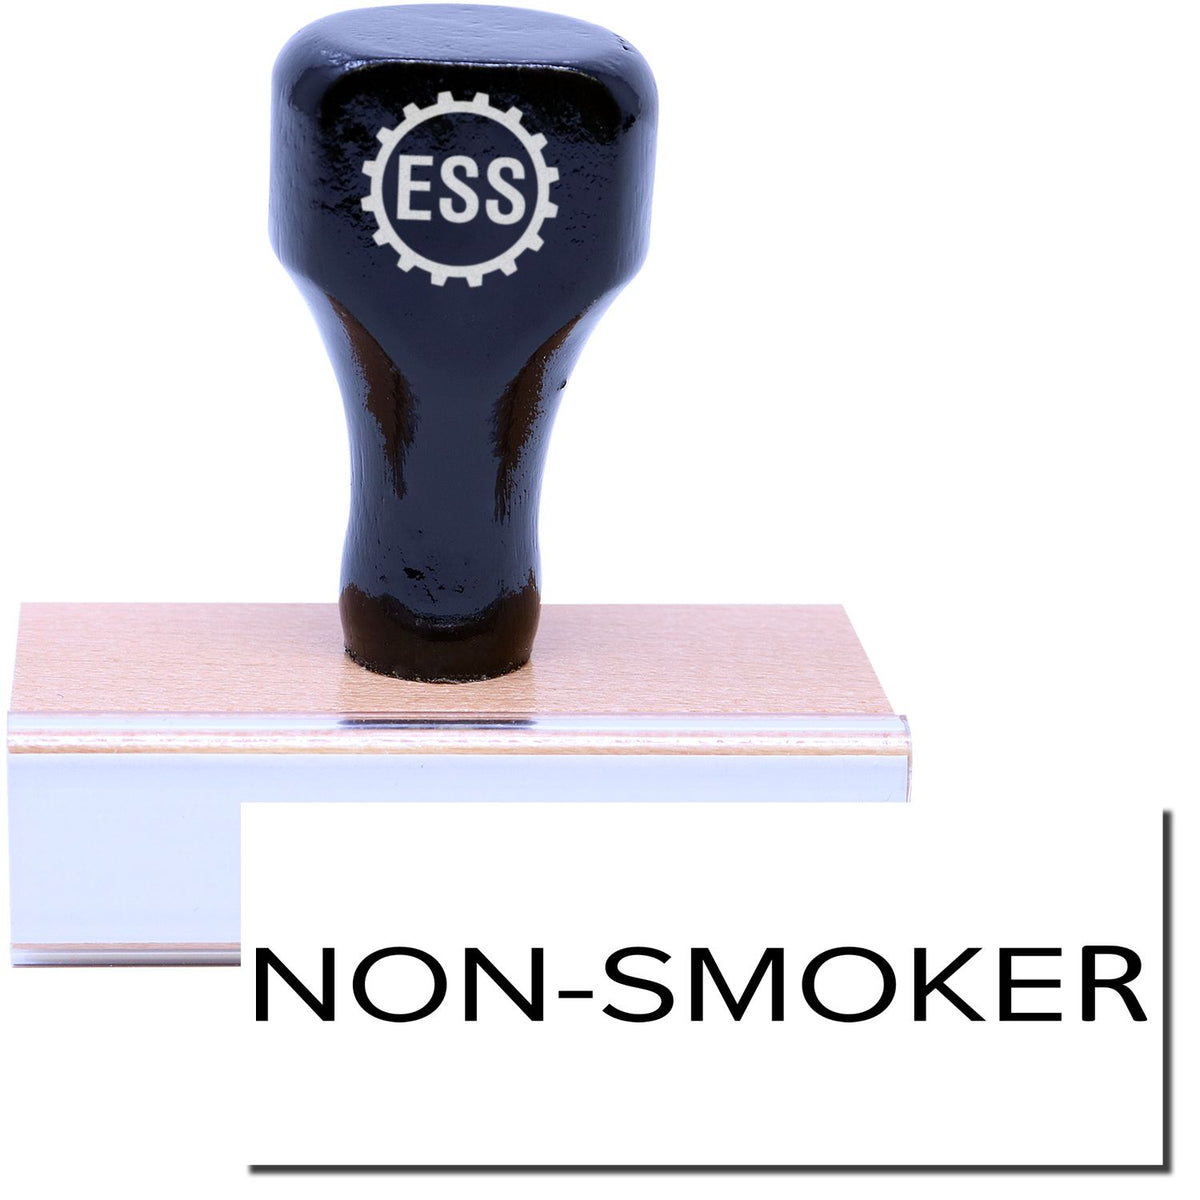 A stock office rubber stamp with a stamped image showing how the text &quot;NON-SMOKER&quot; in a narrow font is displayed after stamping.